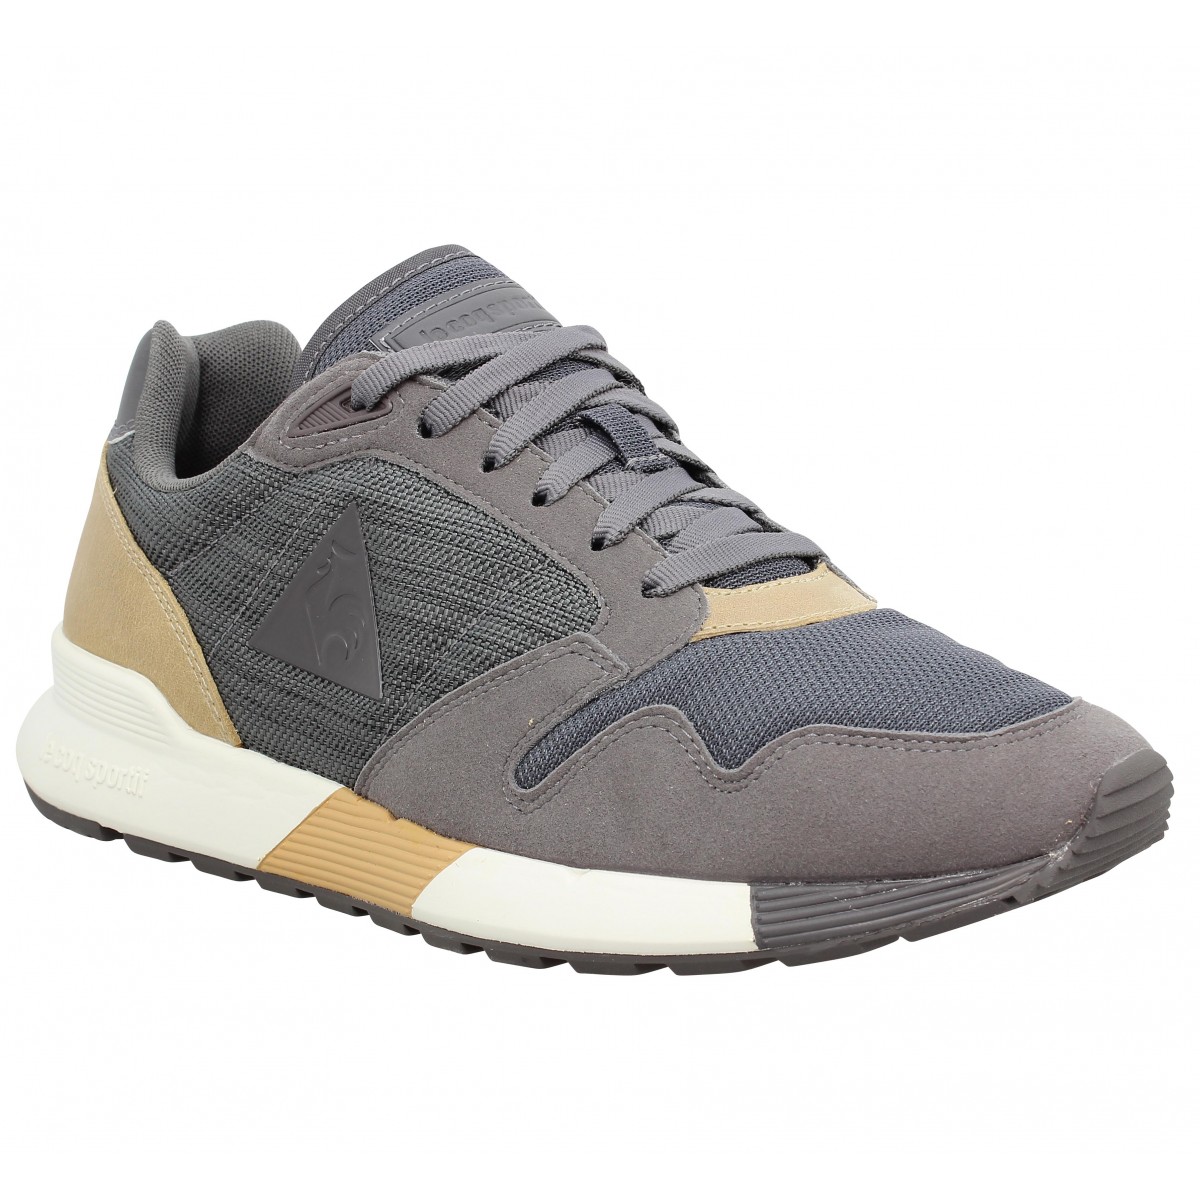 Le coq sportif omega x craft toile homme gris homme | Fanny chaussures